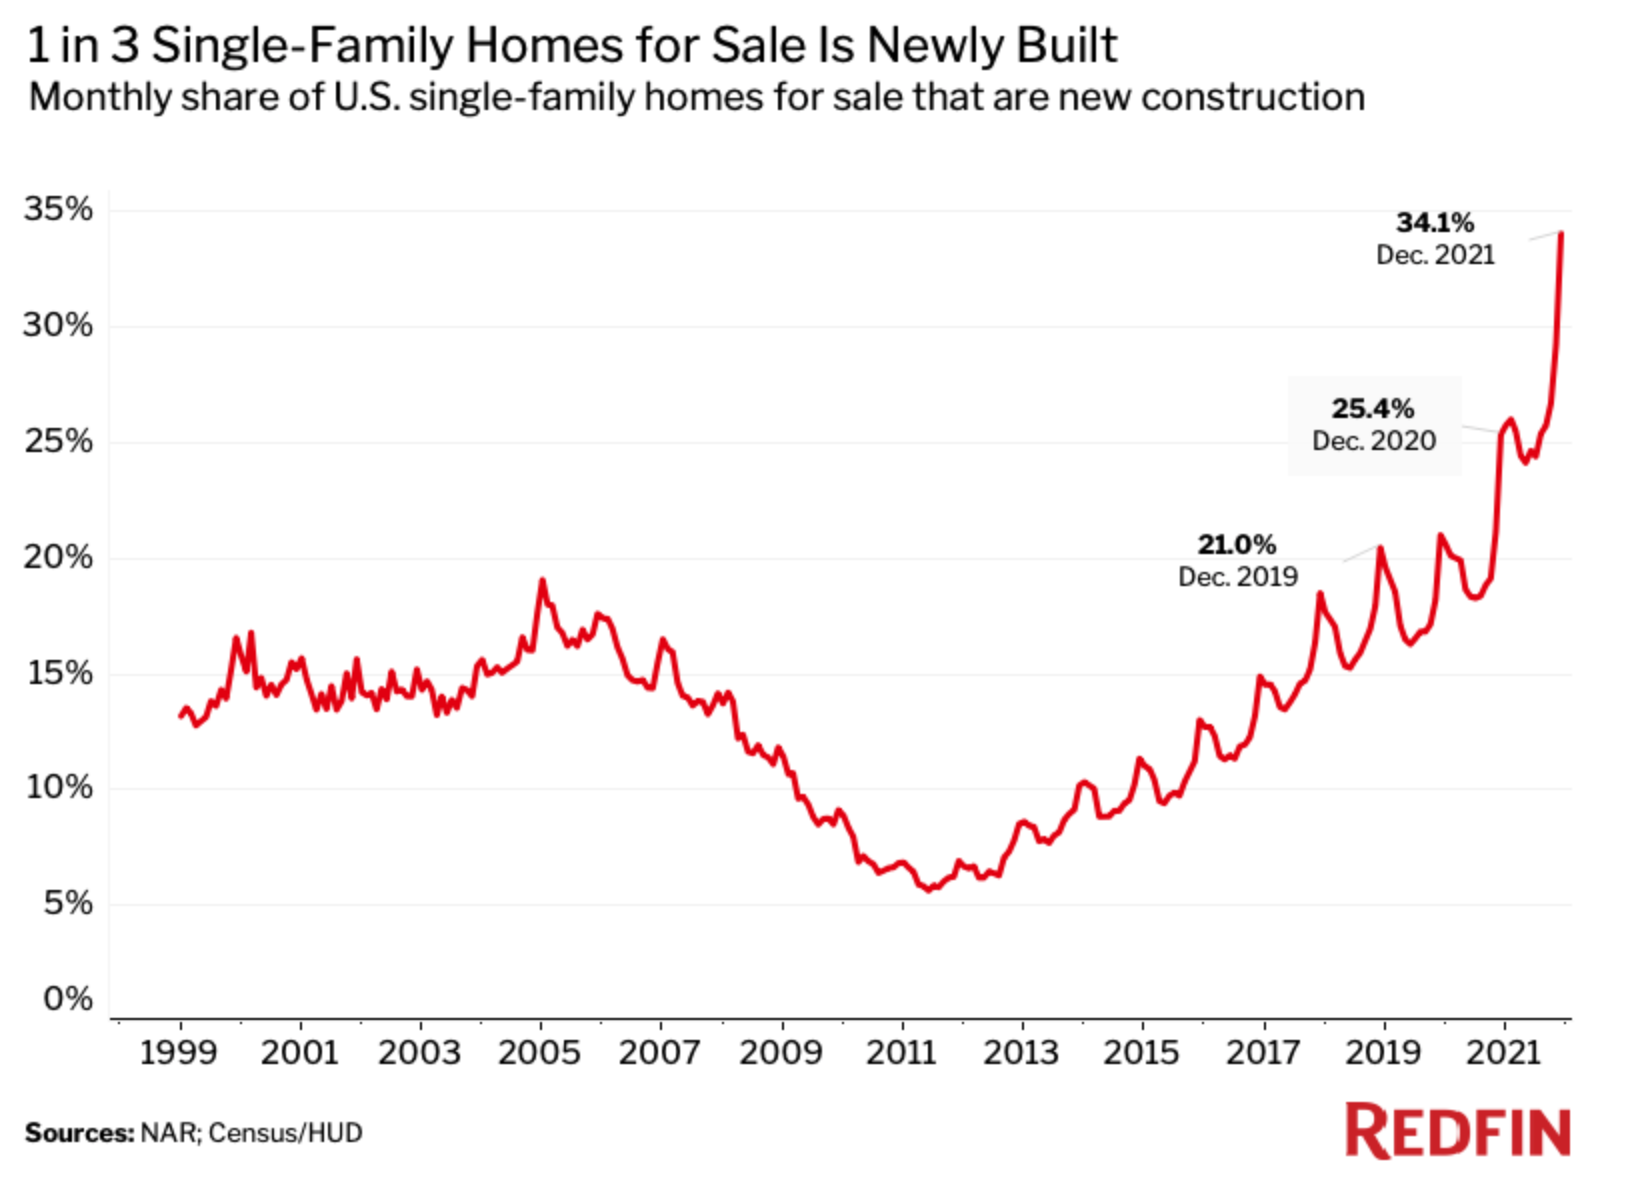 A line graph charting the monthly share of U.S. single-family homes that are newly constructed.